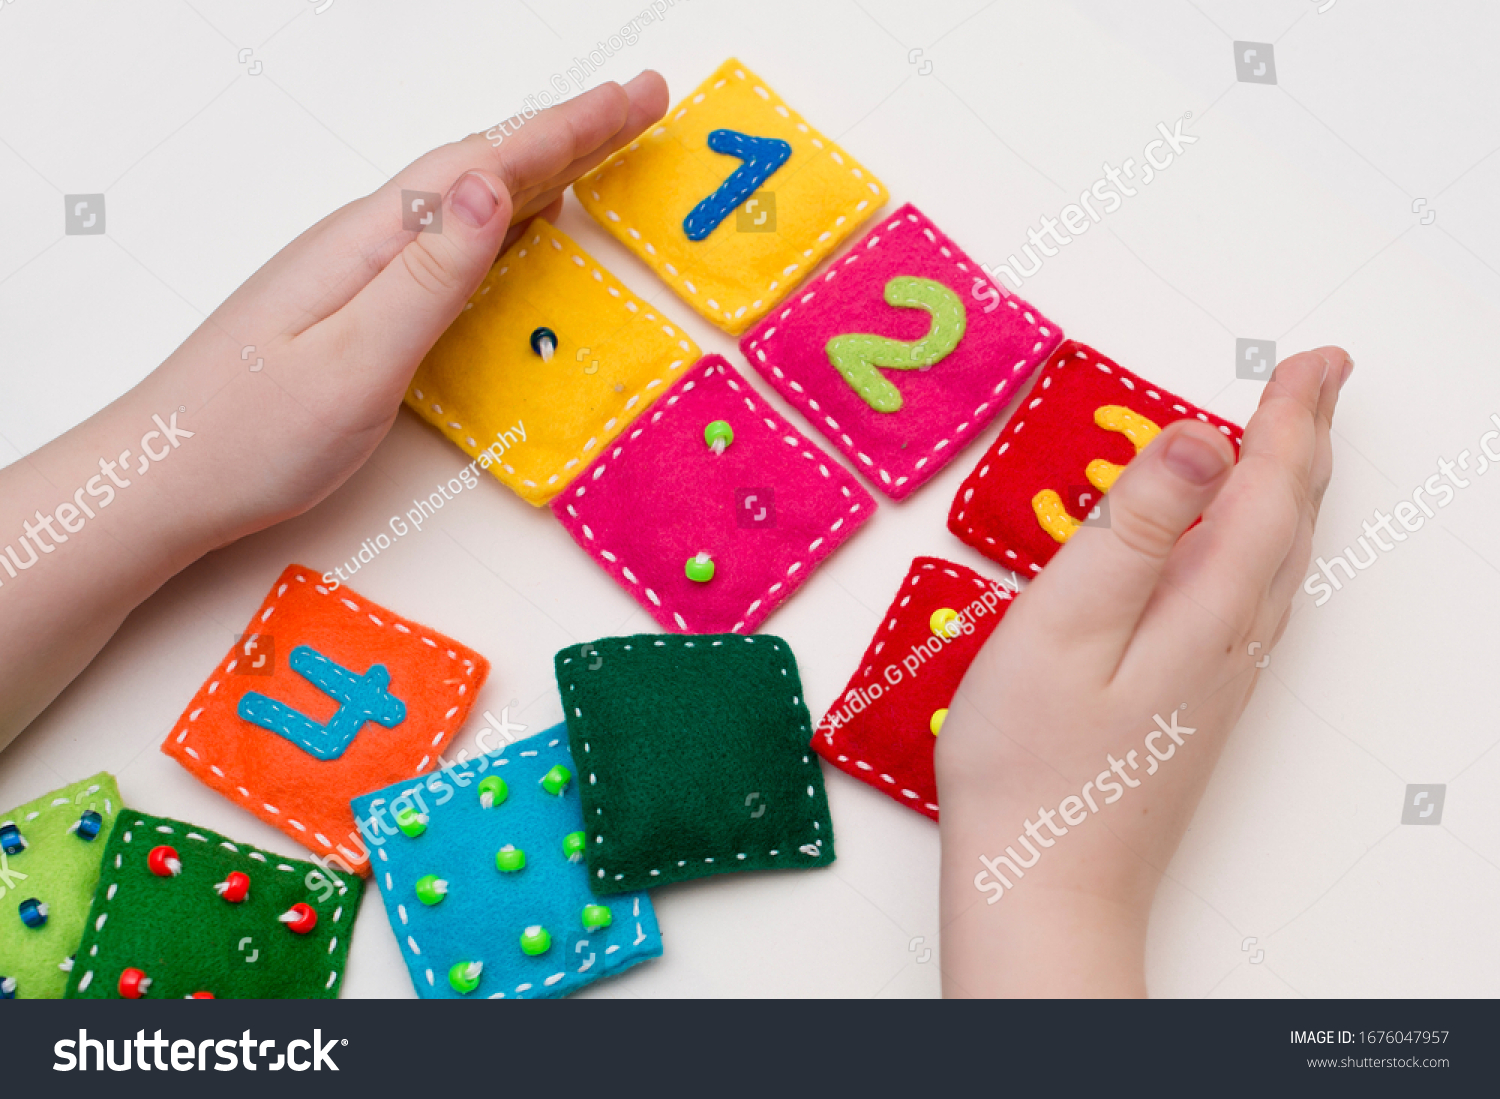 Home made game: find the right pair. Different color stuffed felt square with numbers and matching domino style dots. Early education, learning numbers. #1676047957